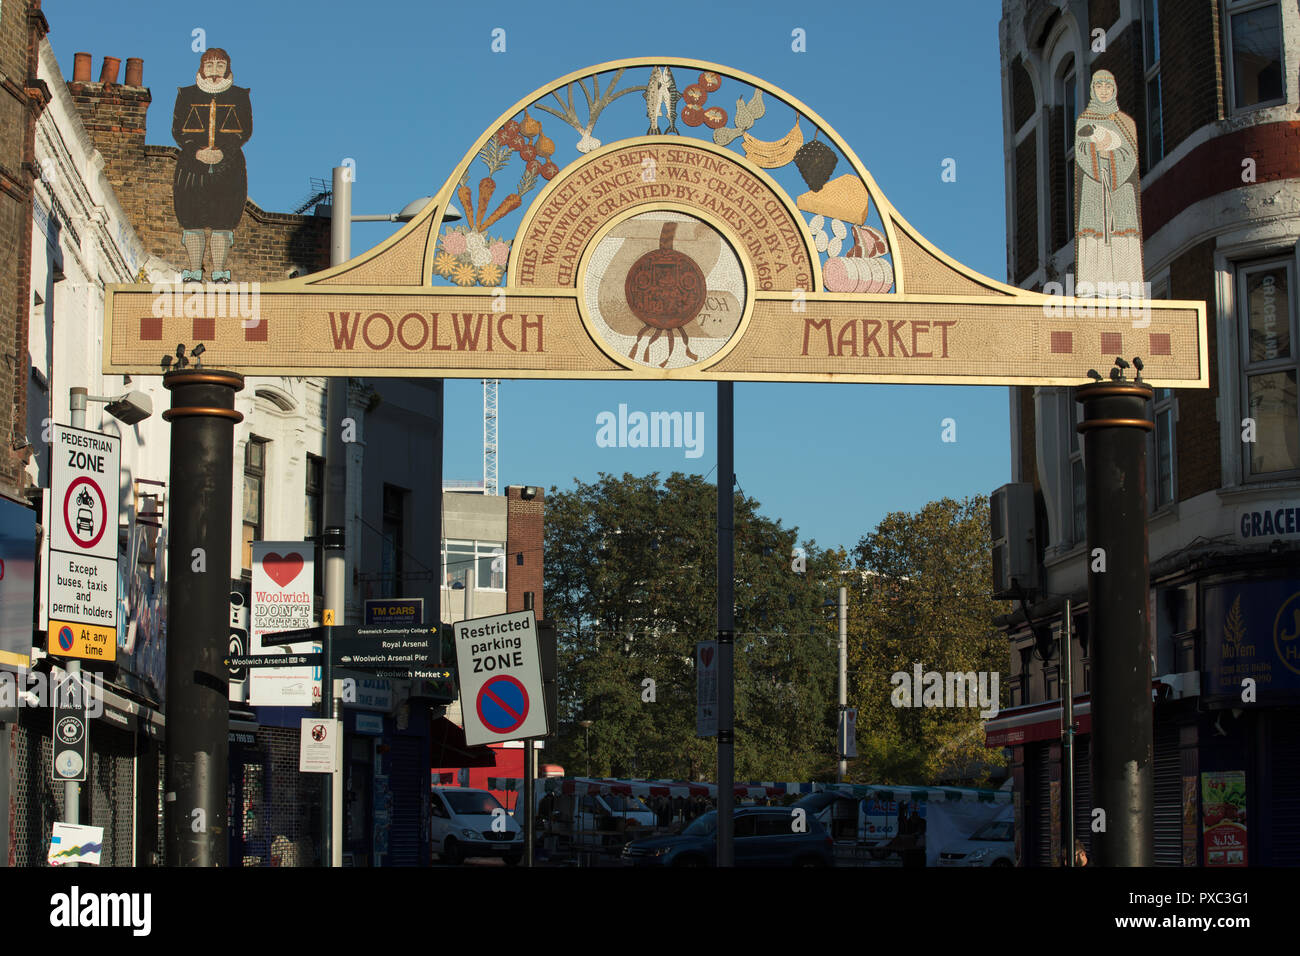 London, UK. 21st October 2018. Entrance to Woolwich Market opens in Beresford Square from today, each Sunday of the year from 9am to 5pm, bringing about 40 independent traders of mixed vintage, crafts, jewellery, gifts, arts, hidden gems, street food and live music to the centre of the town.  Credit: Joe Kuis / Alamy Live News Stock Photo